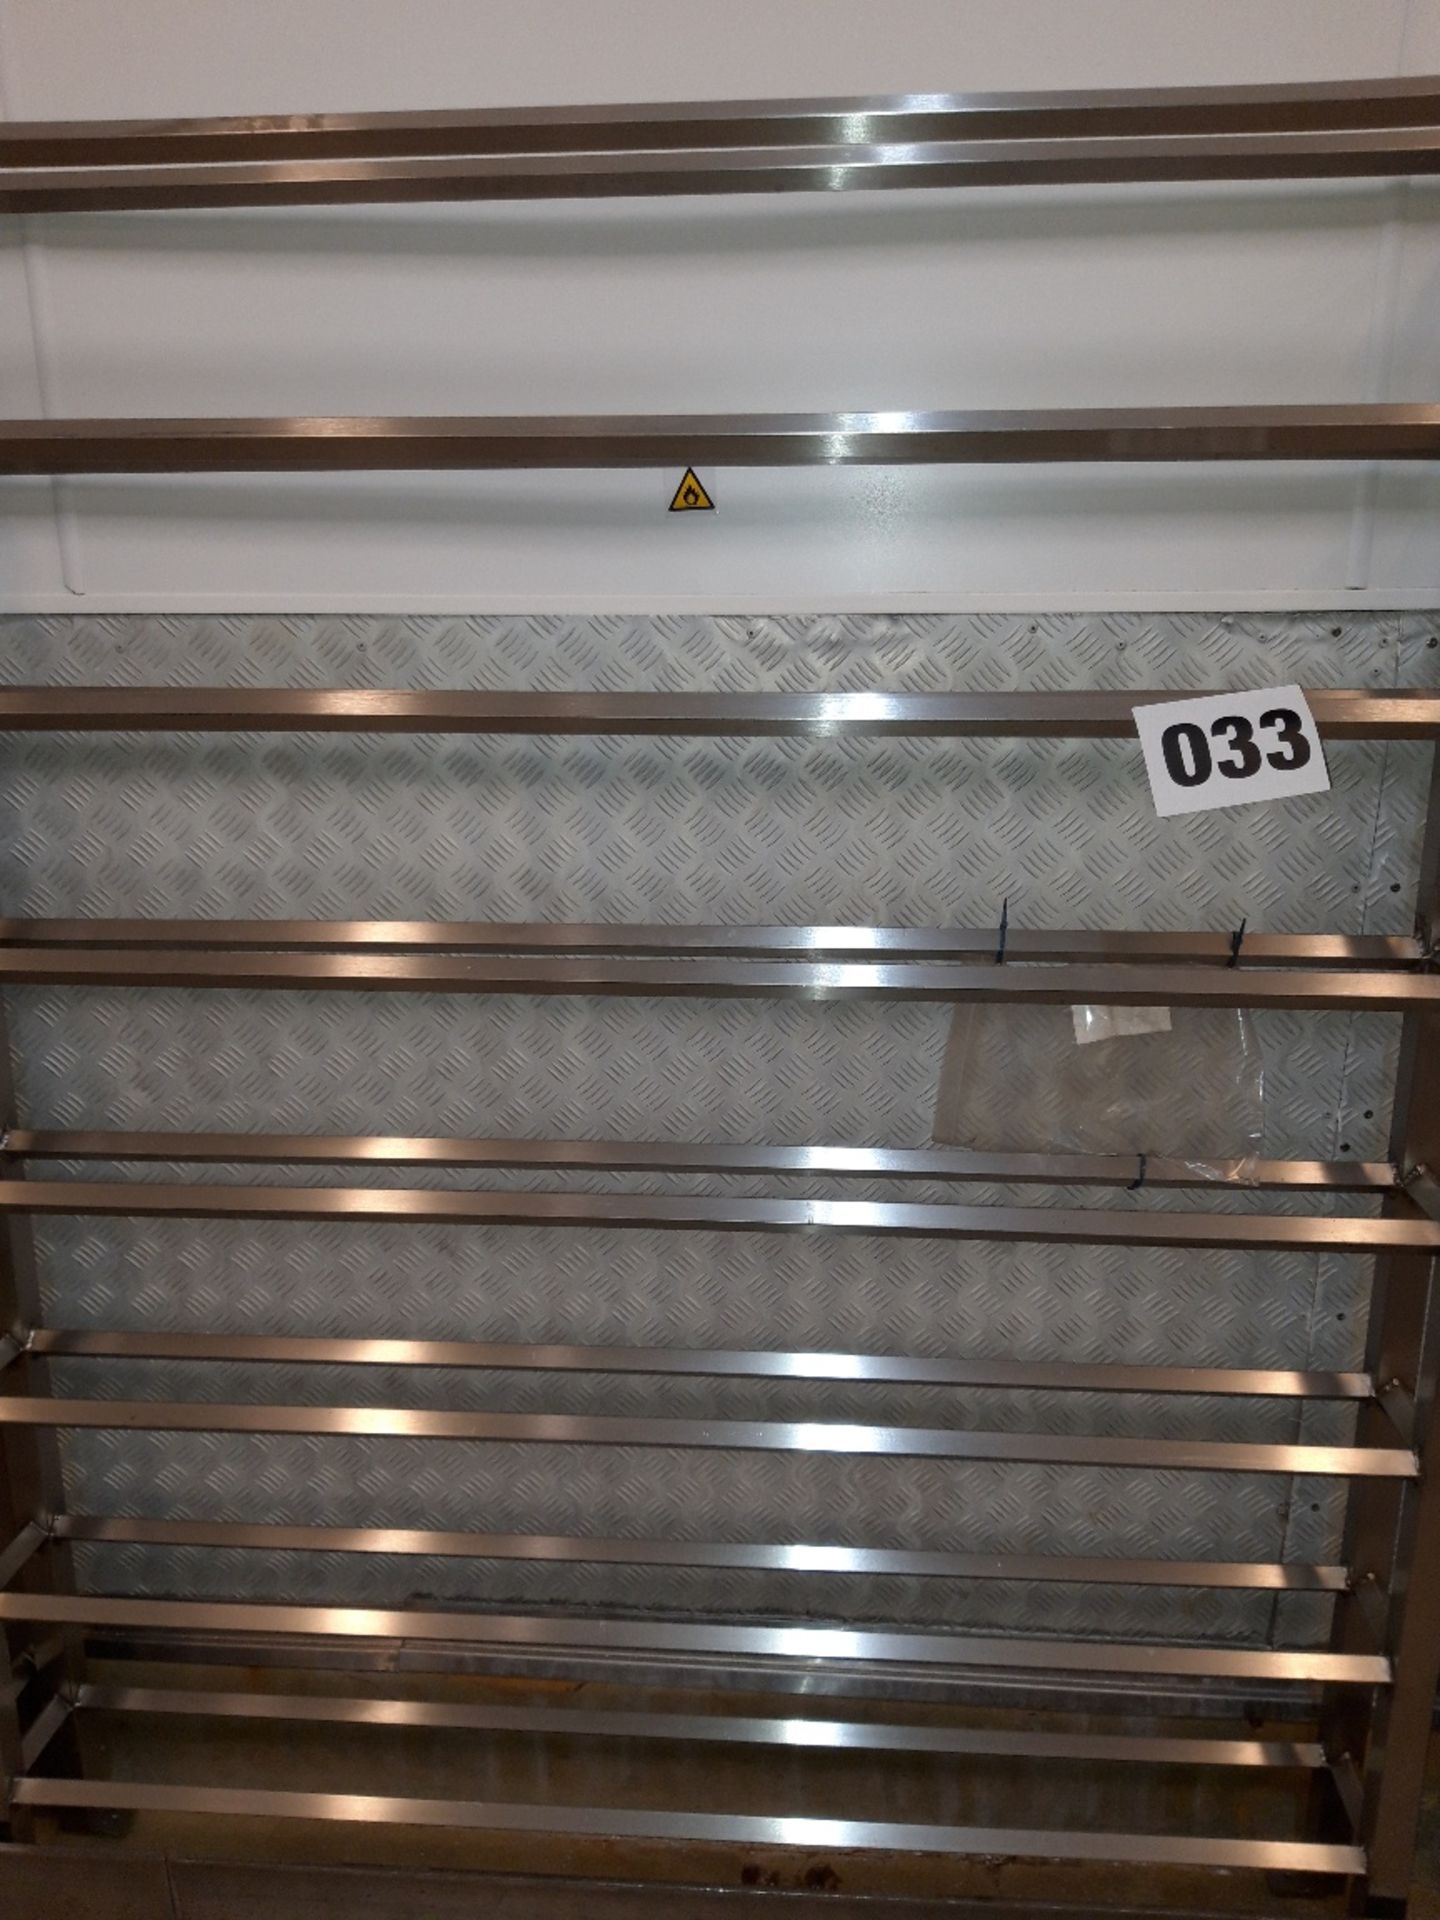 S/s Shoe Rack. Floor standing, approx 1.5 metres long x 1.8 metres high x 200mm wide Lift out £10